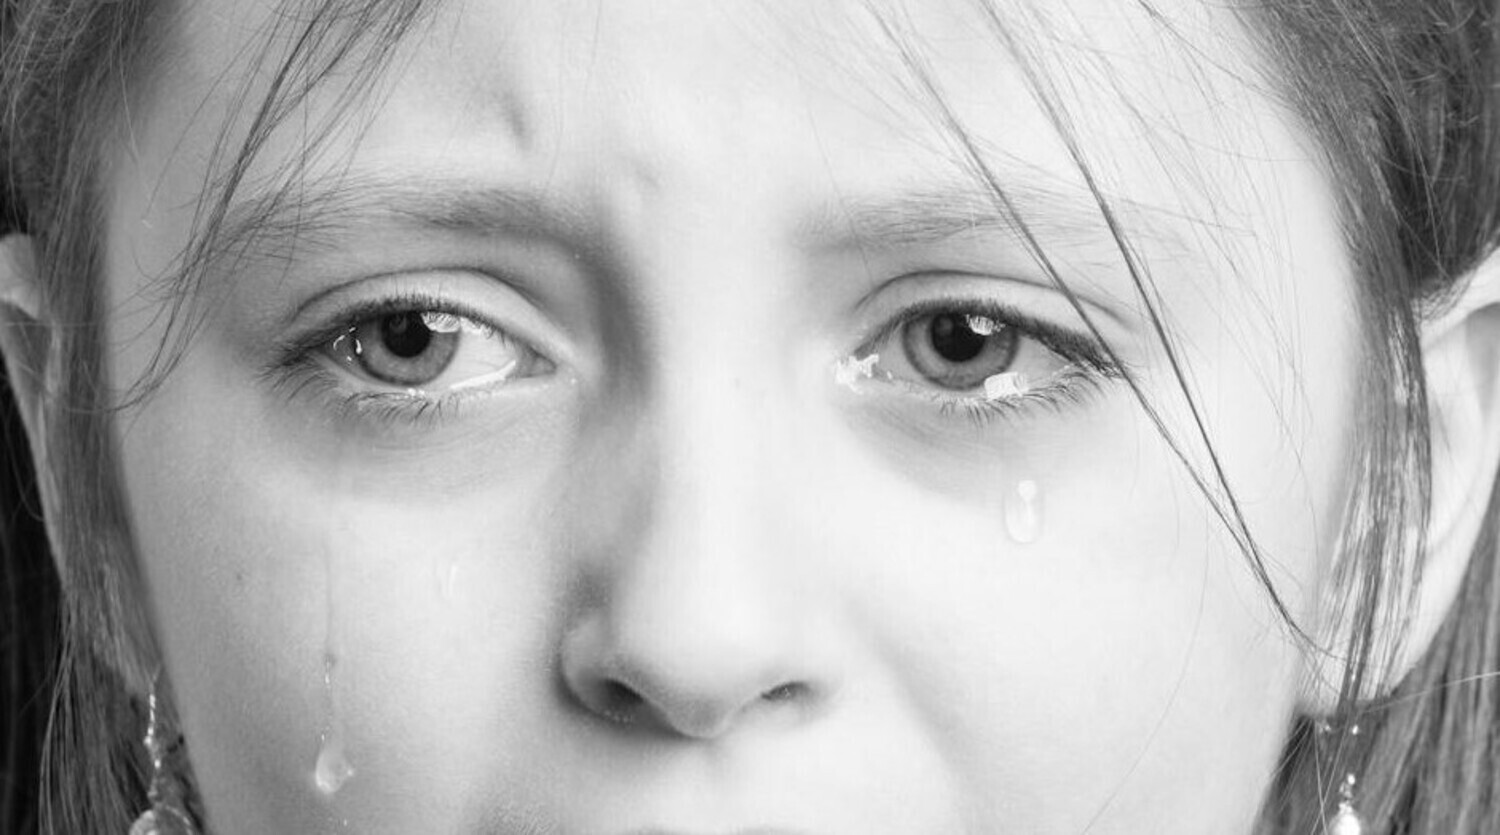 A sad little girl crying | Source: Pexels